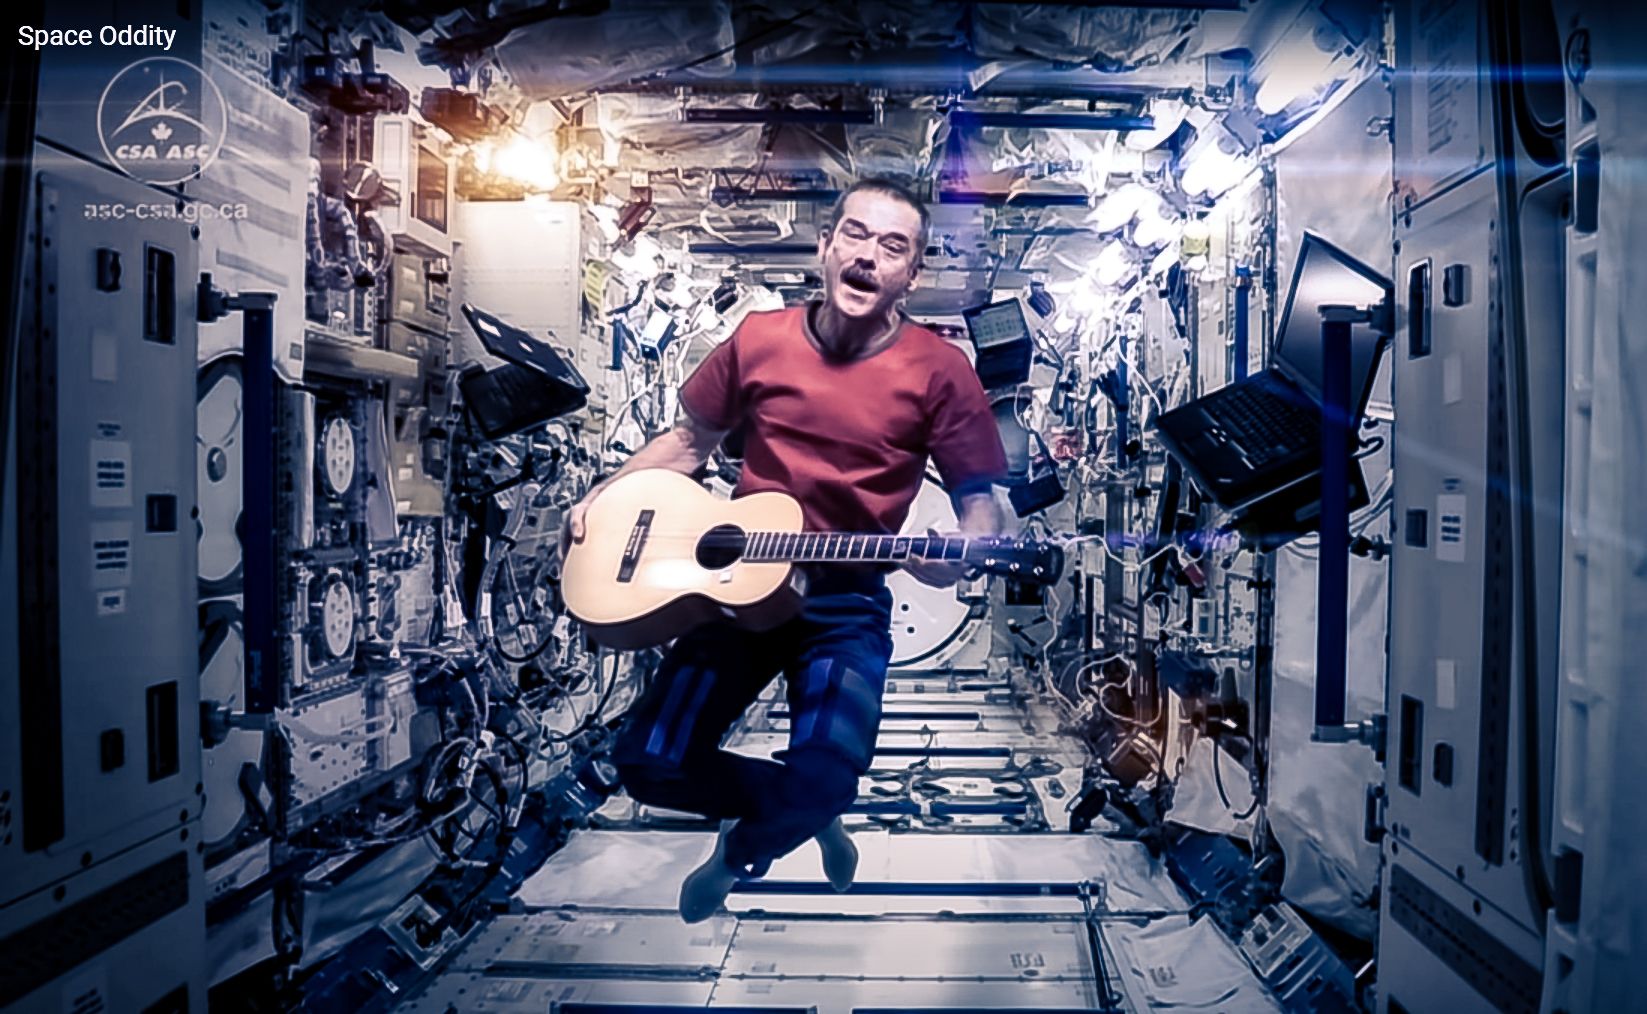 NASA sends Singer and Song writer Chris Hadfield to the ISS to make contact with Major Tom - 2013